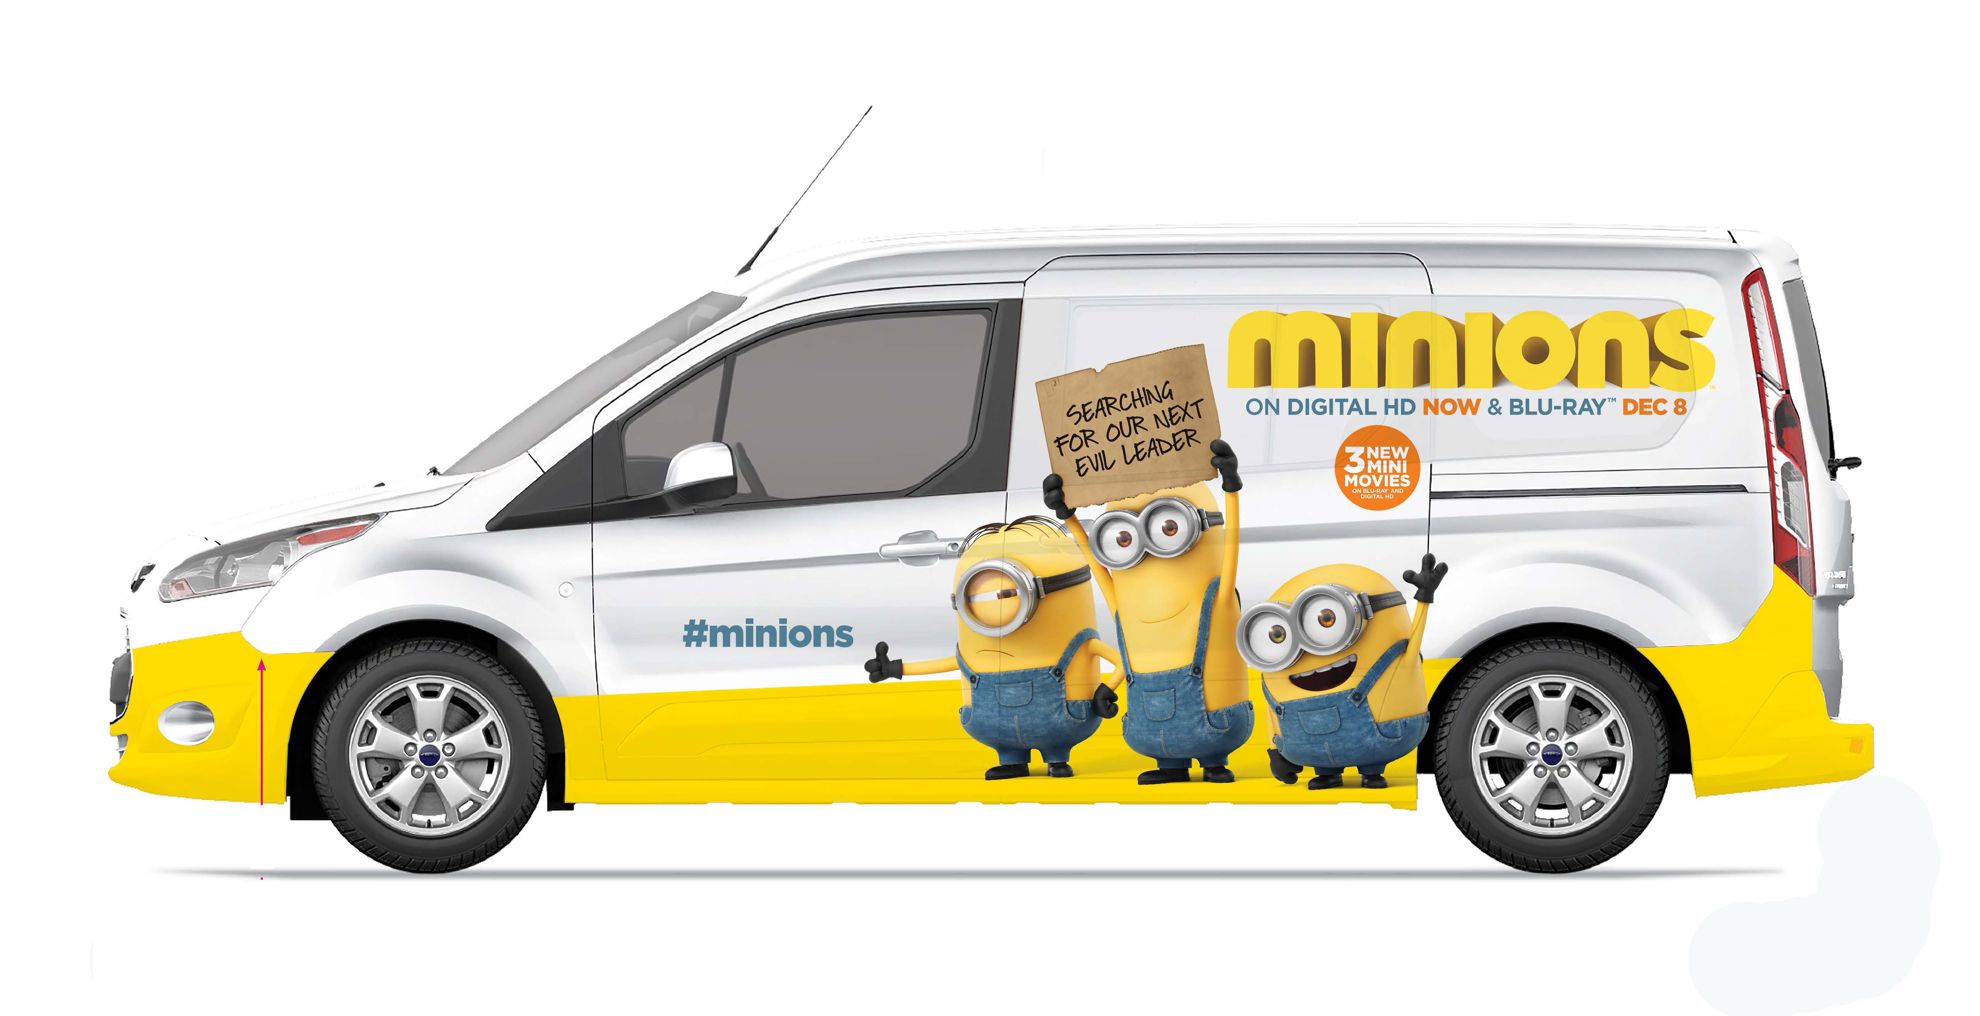 Ford Transit Minions Van for the Minions